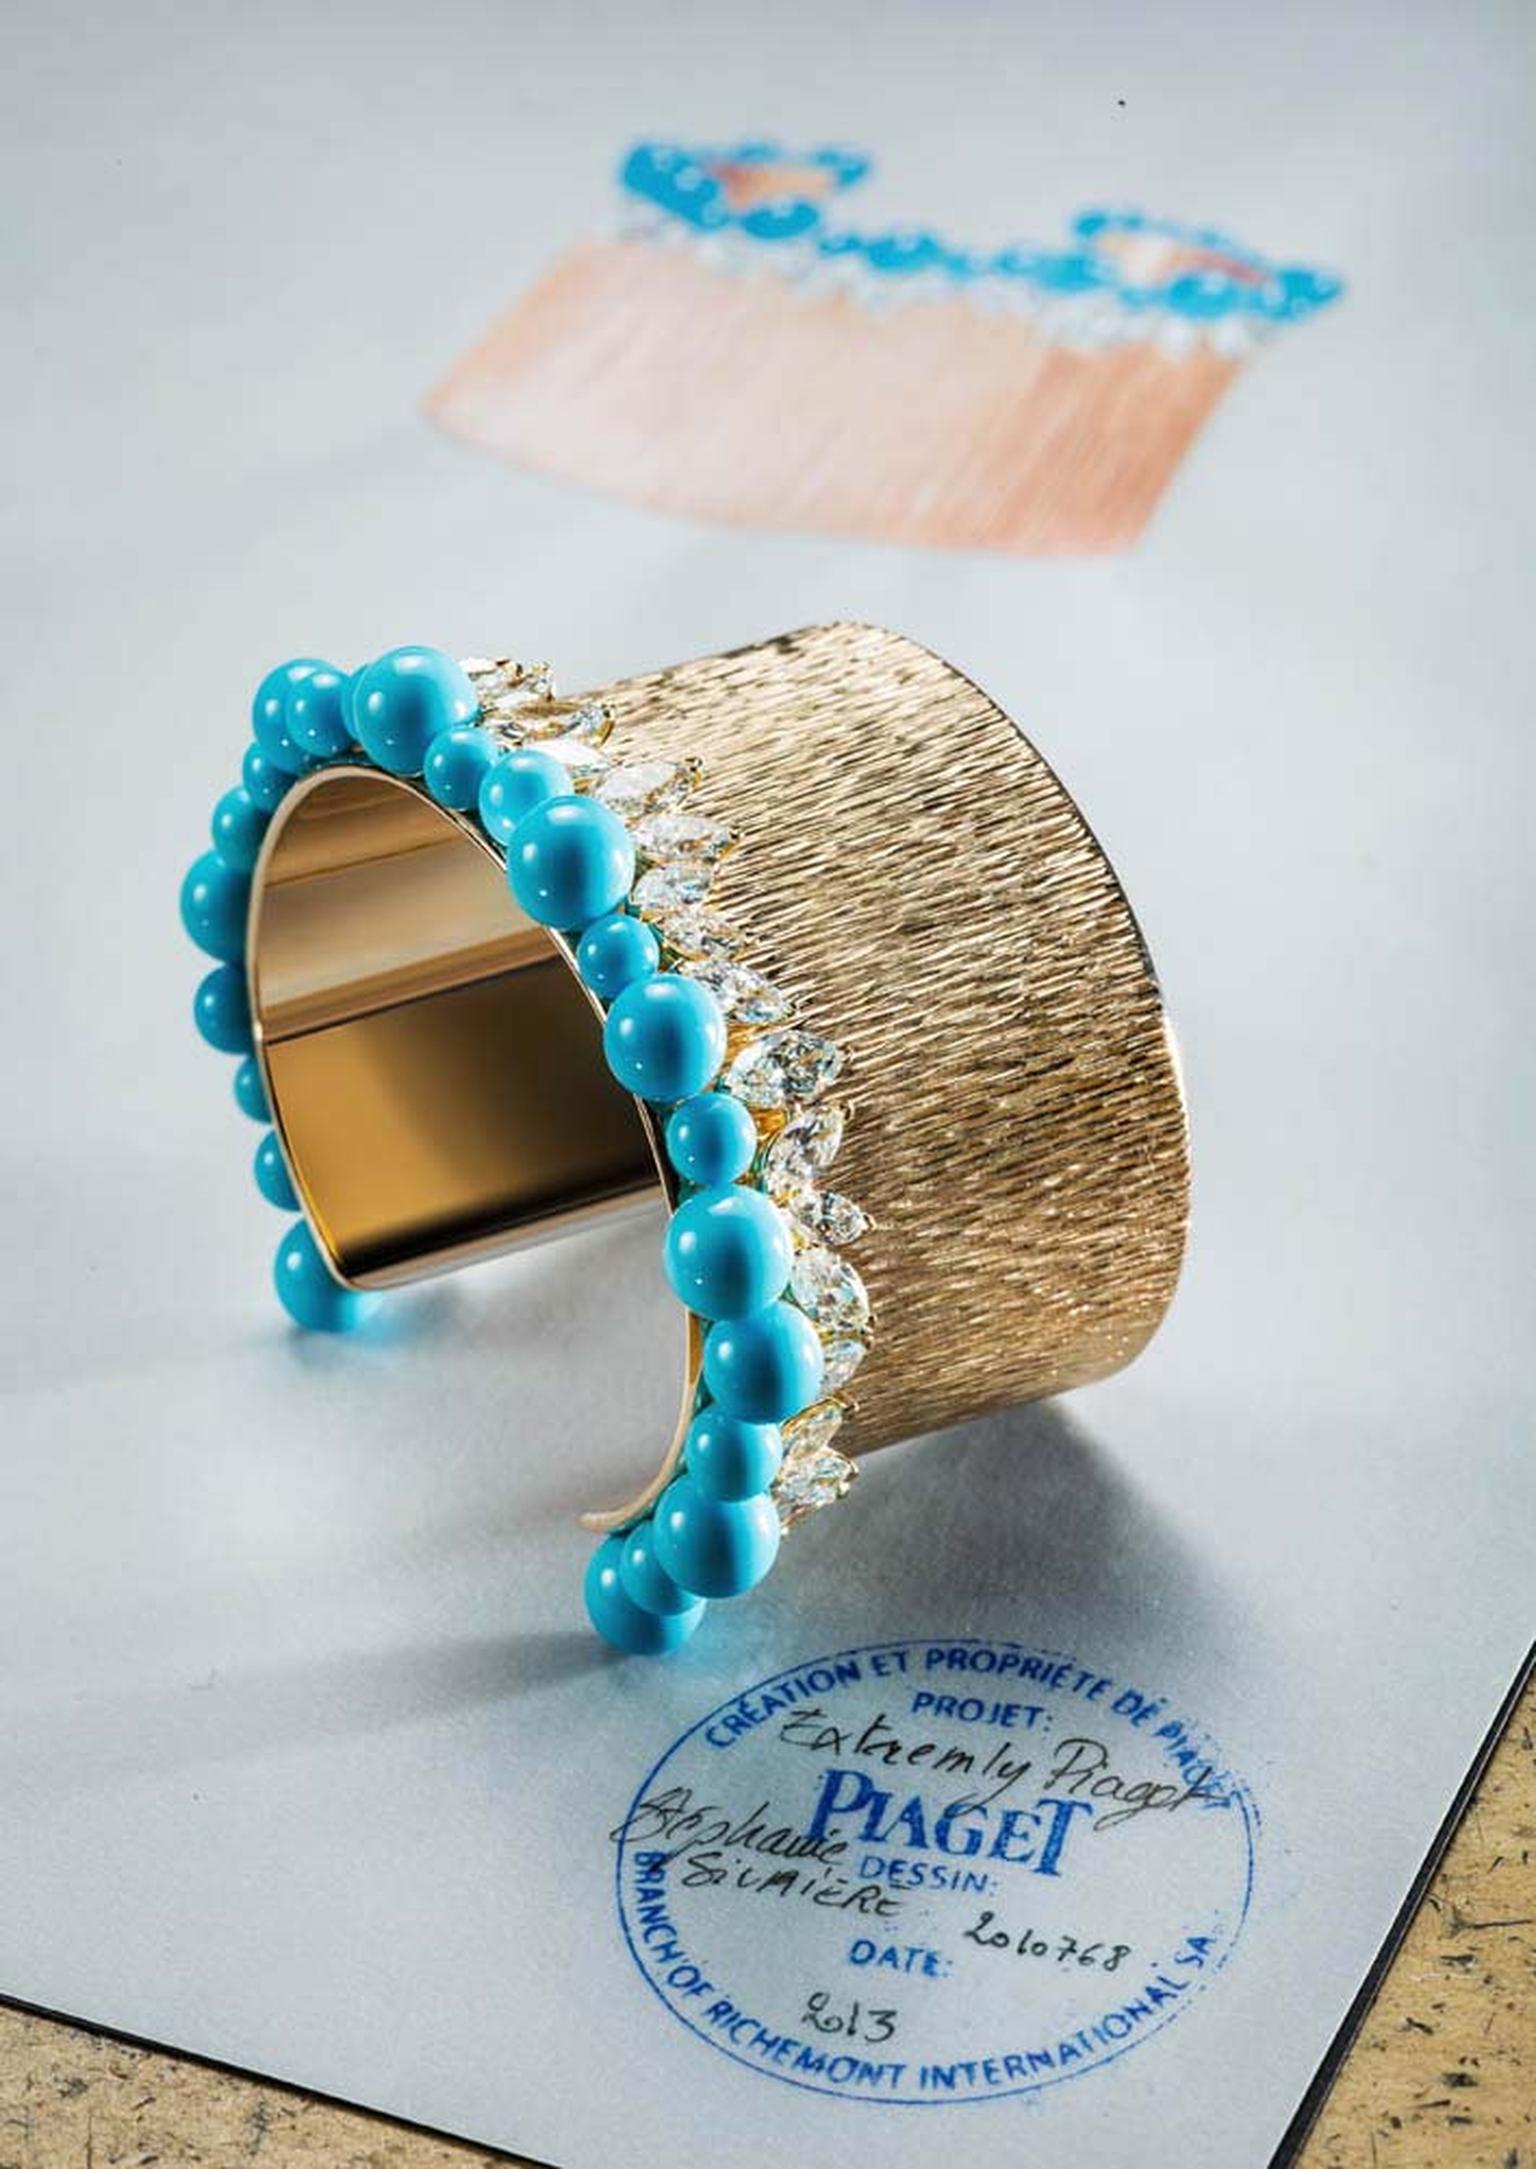 Extremely Piaget collection Palace bracelet in pink gold set with 32 marquise-cut diamonds and 23 turquoise beads.